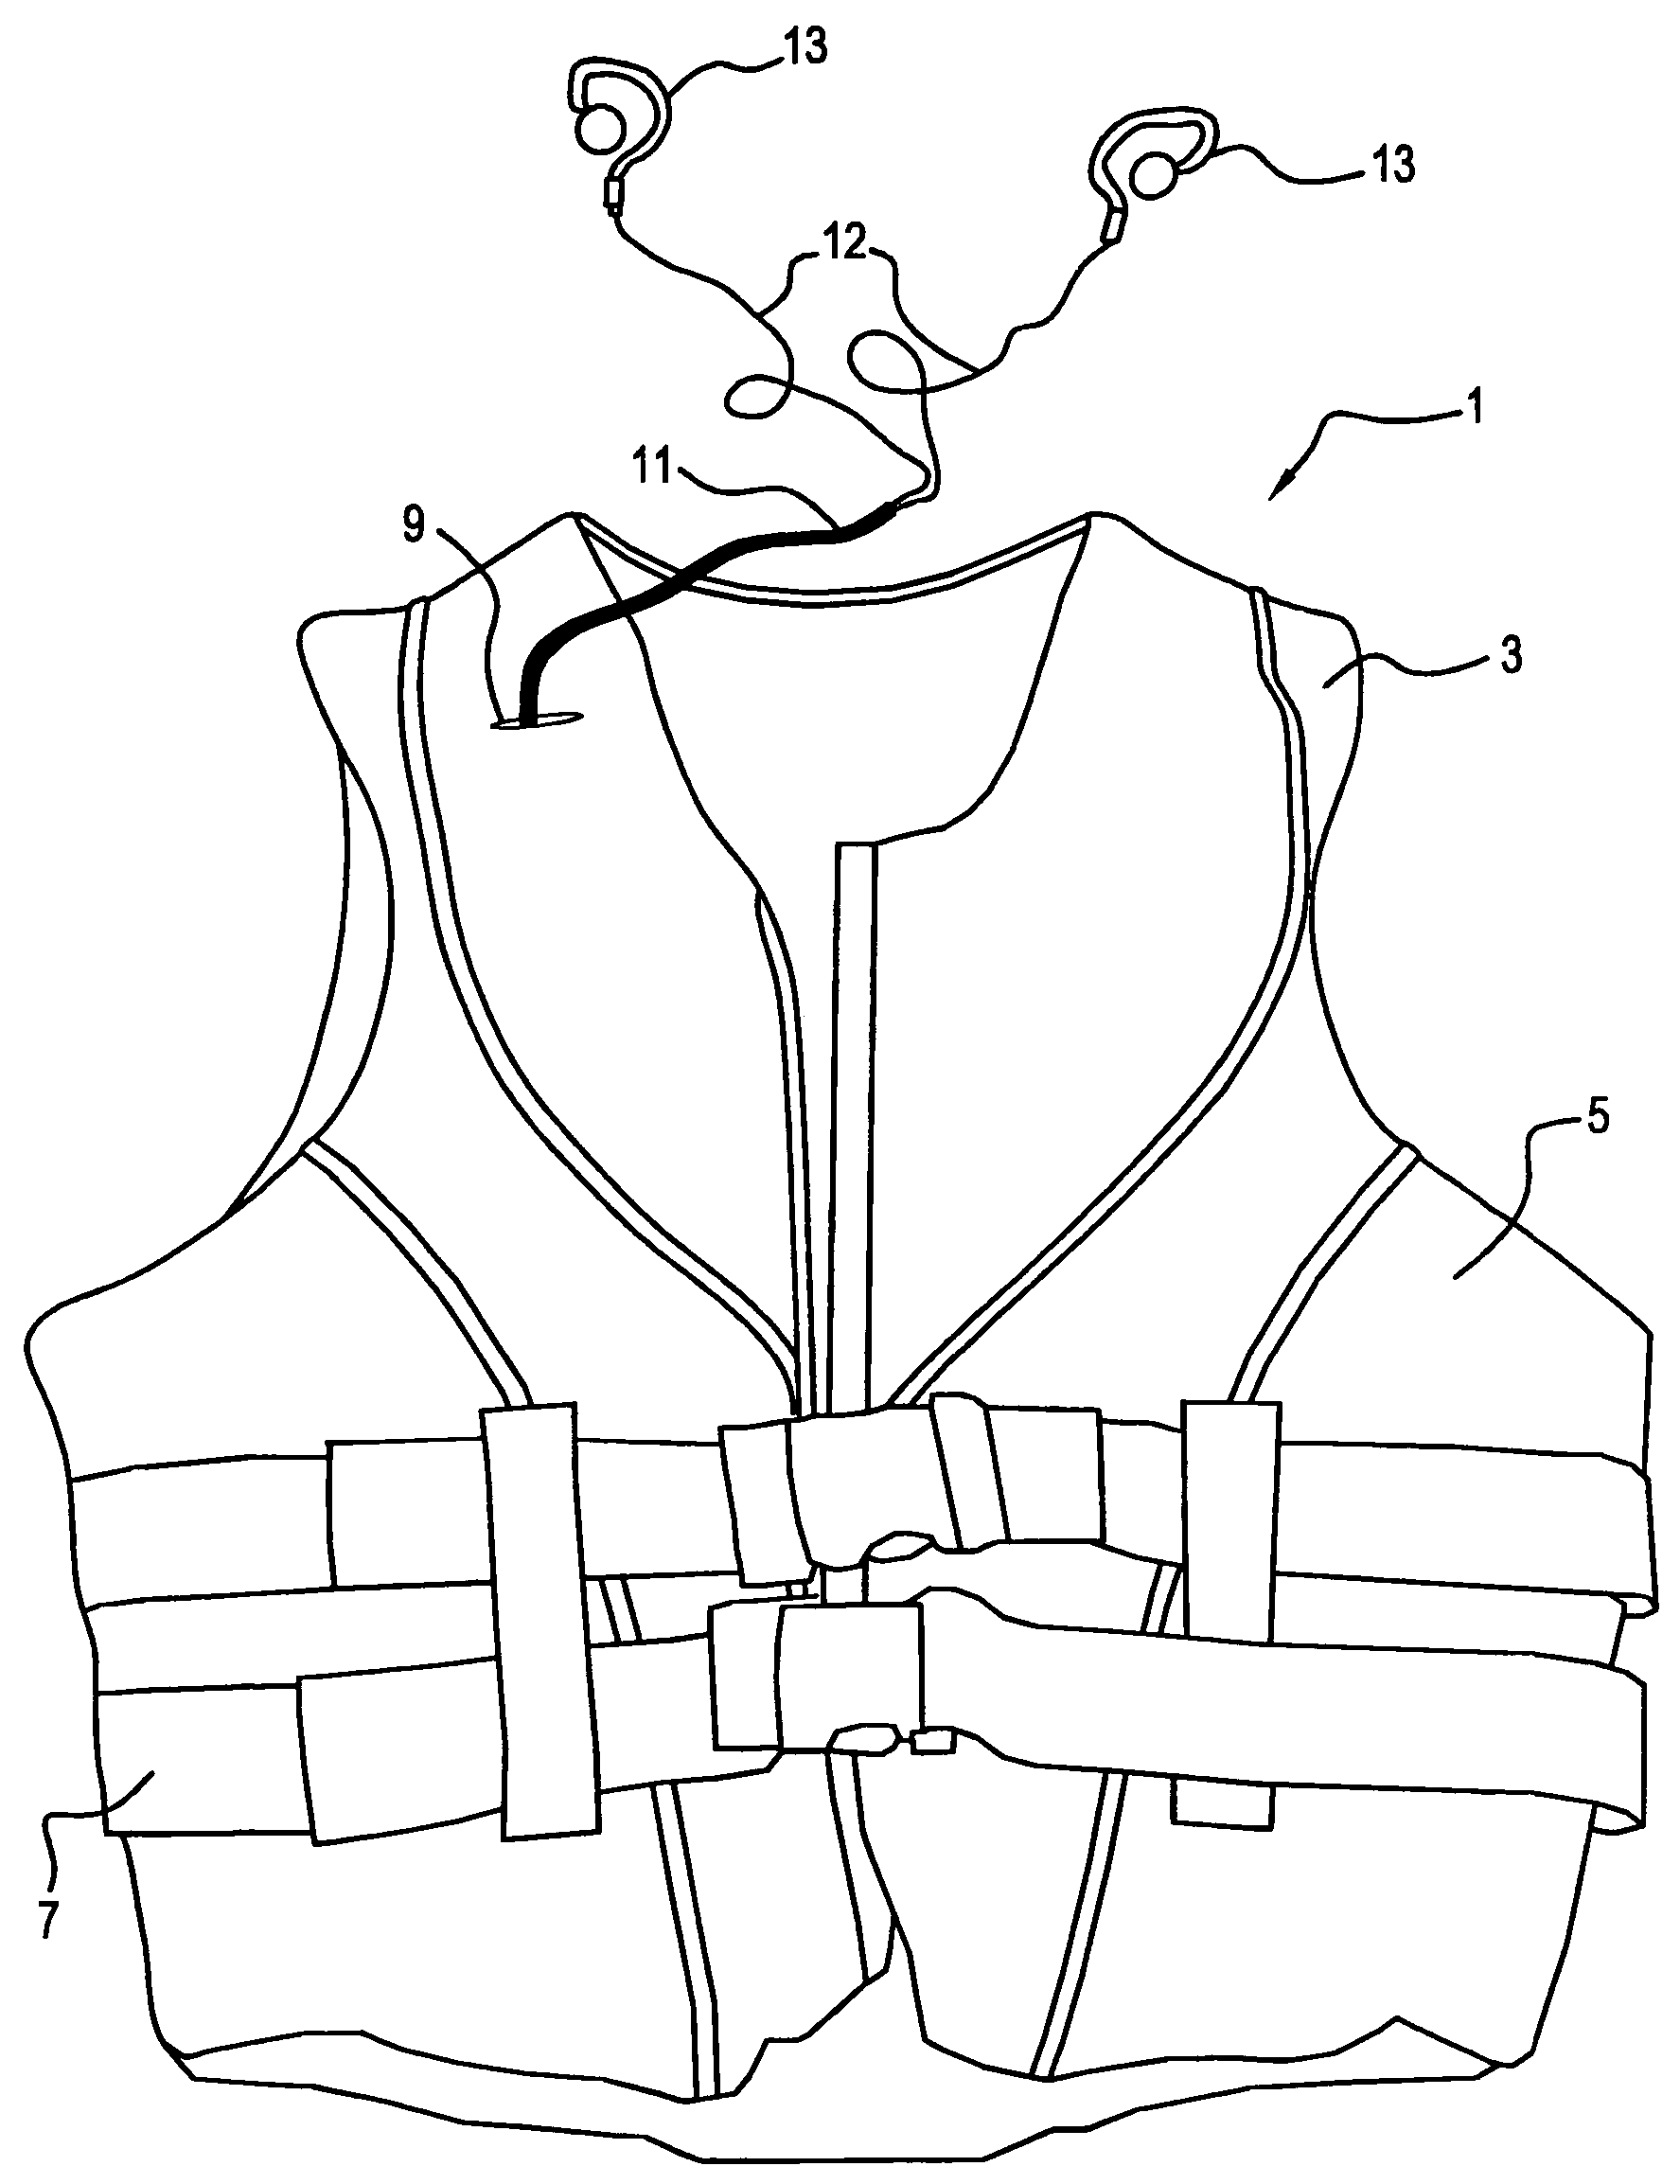 Life vest with integrated audio device and method of use